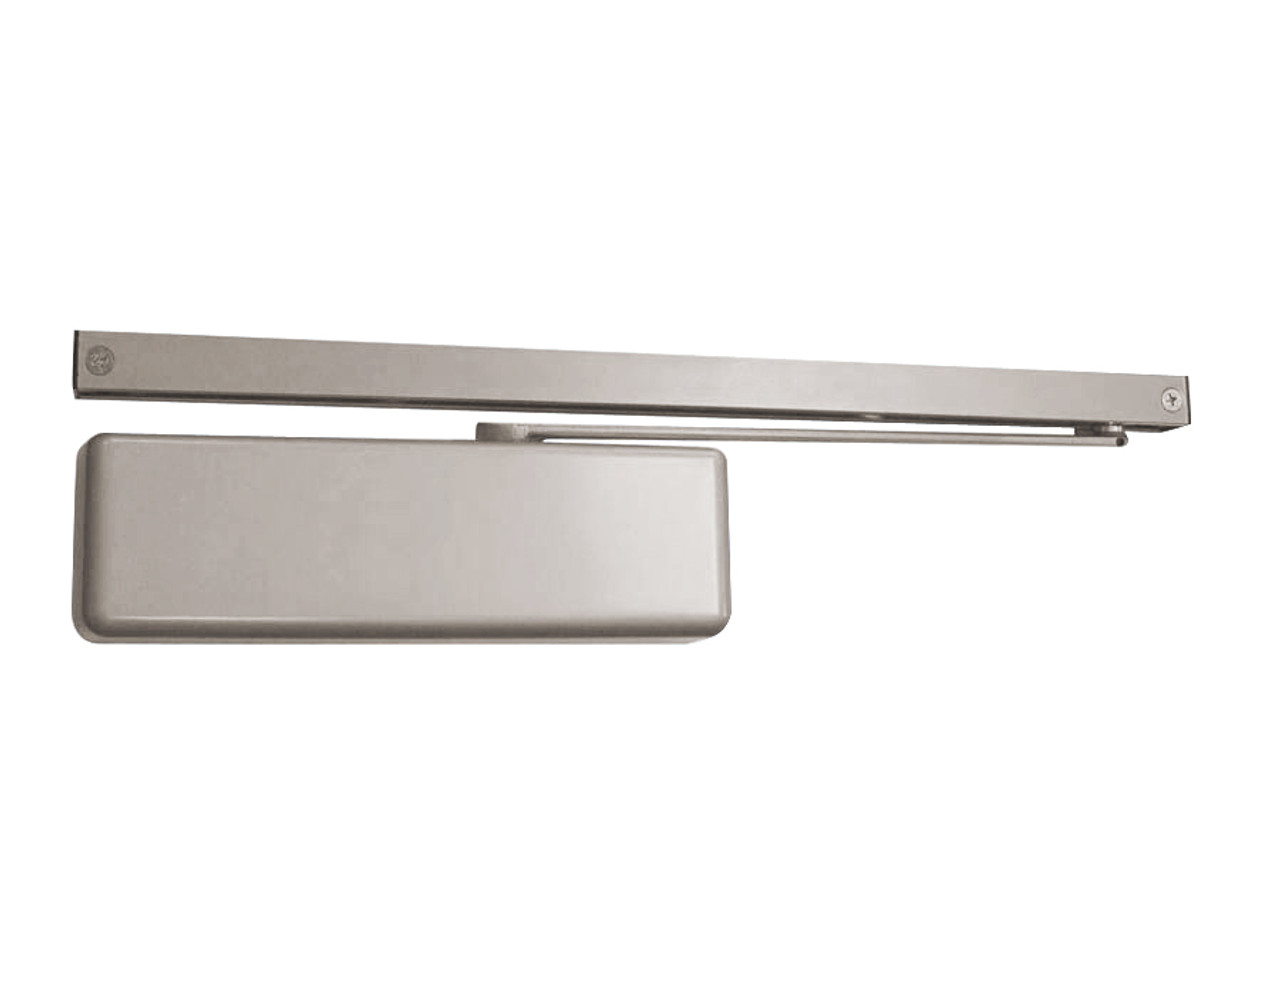 4013T-DE-HO-RH-US26 LCN Door Closer with Double Egress Hold Open Arm in Bright Chrome Finish